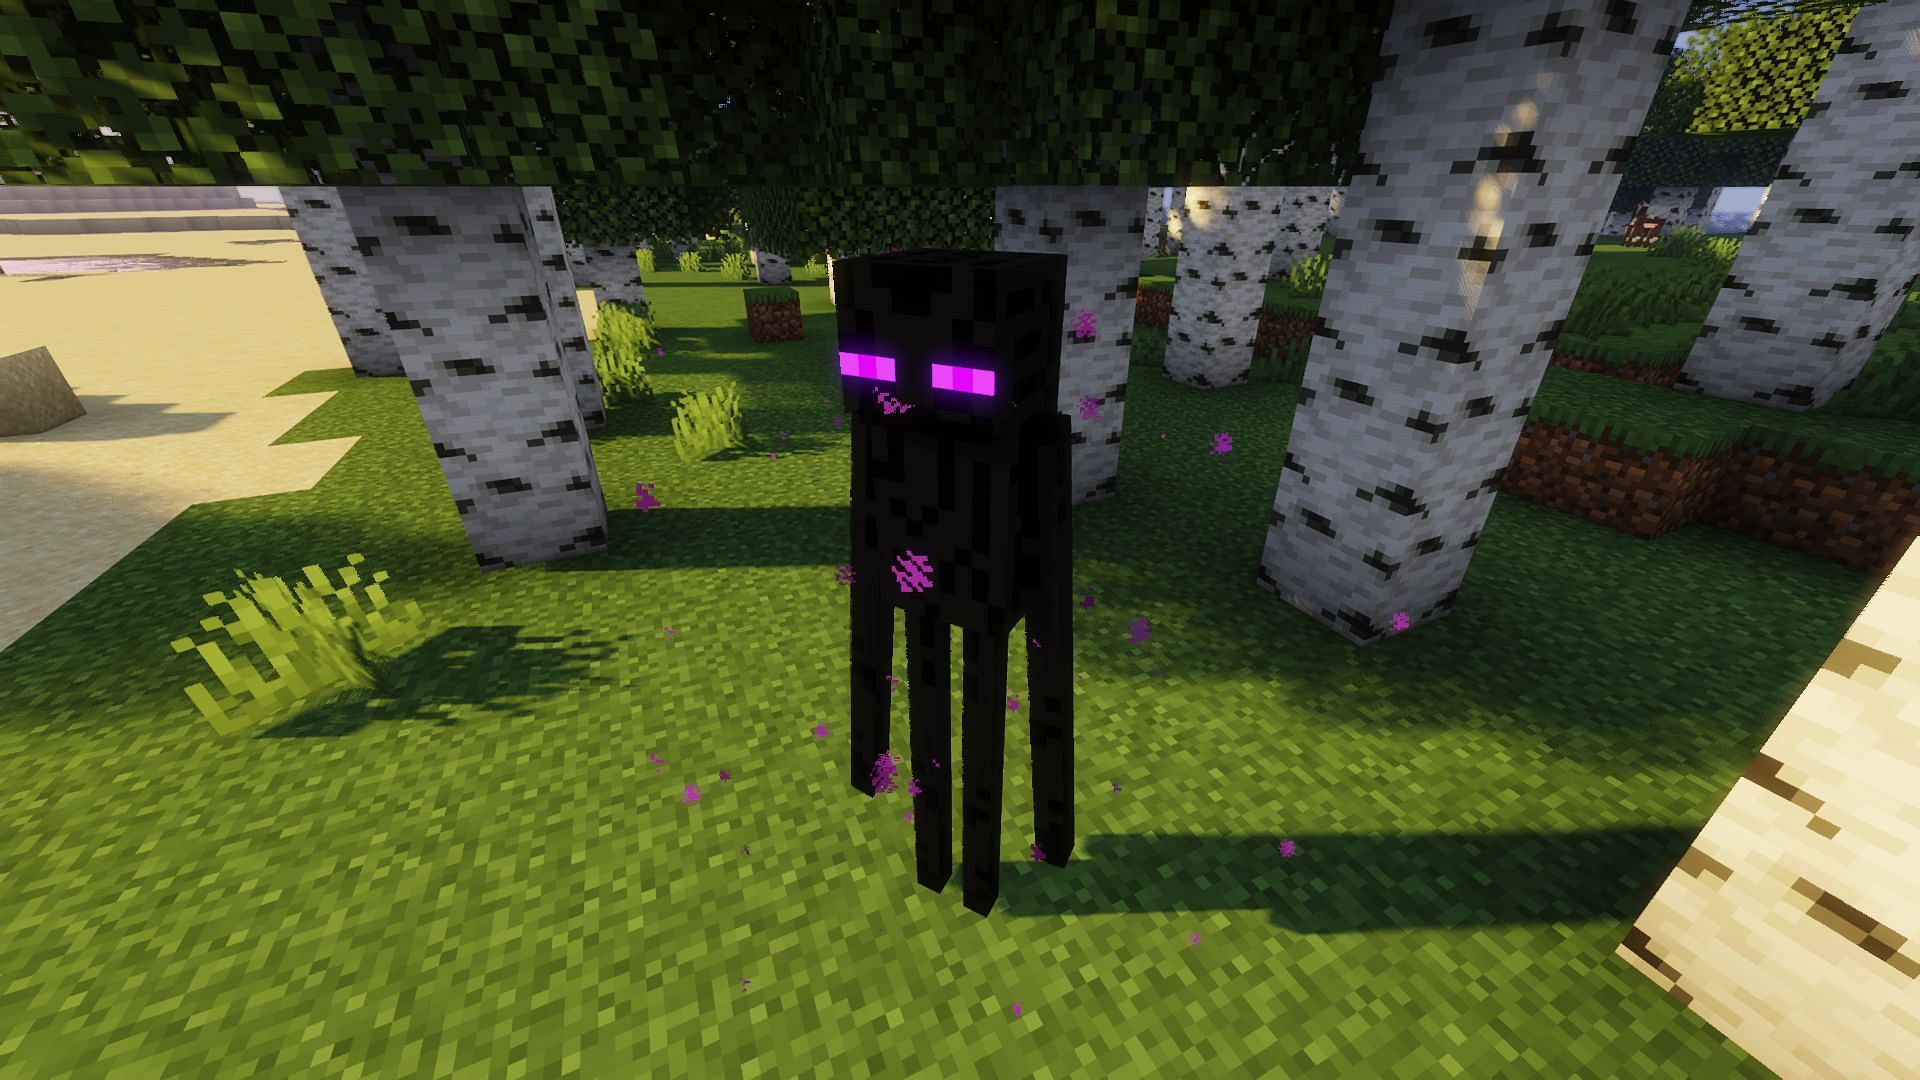 Endermen are truly lethal when angry due to their high damage and ability to teleport (Image via Mojang)